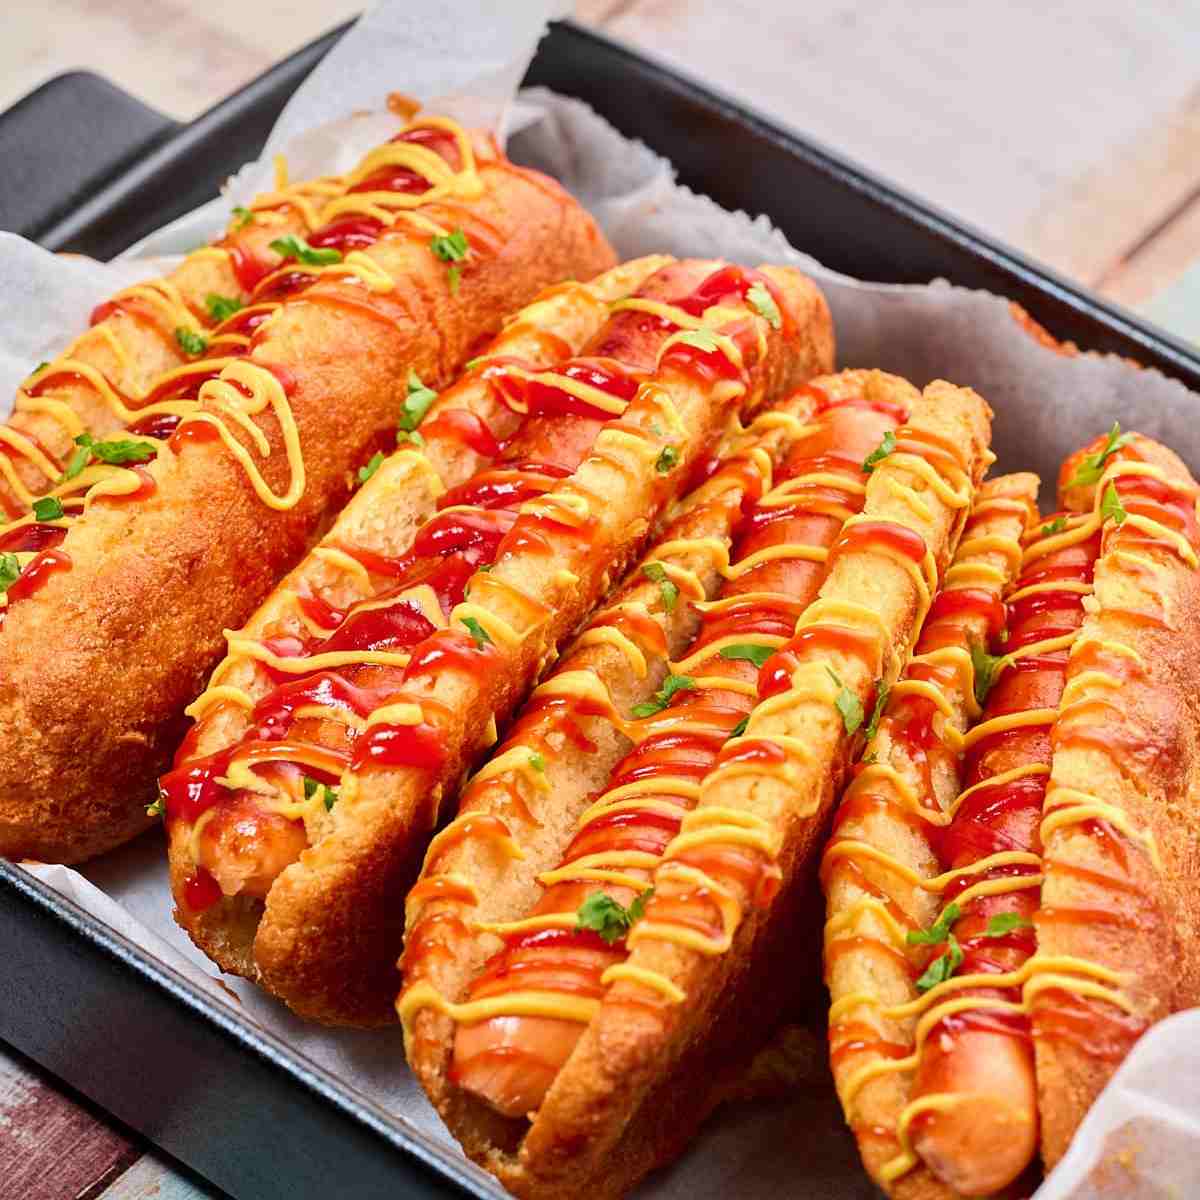 Coconut and almond flour hot dog buns with hot dogs in them  and sauce on the top in a baking dish.